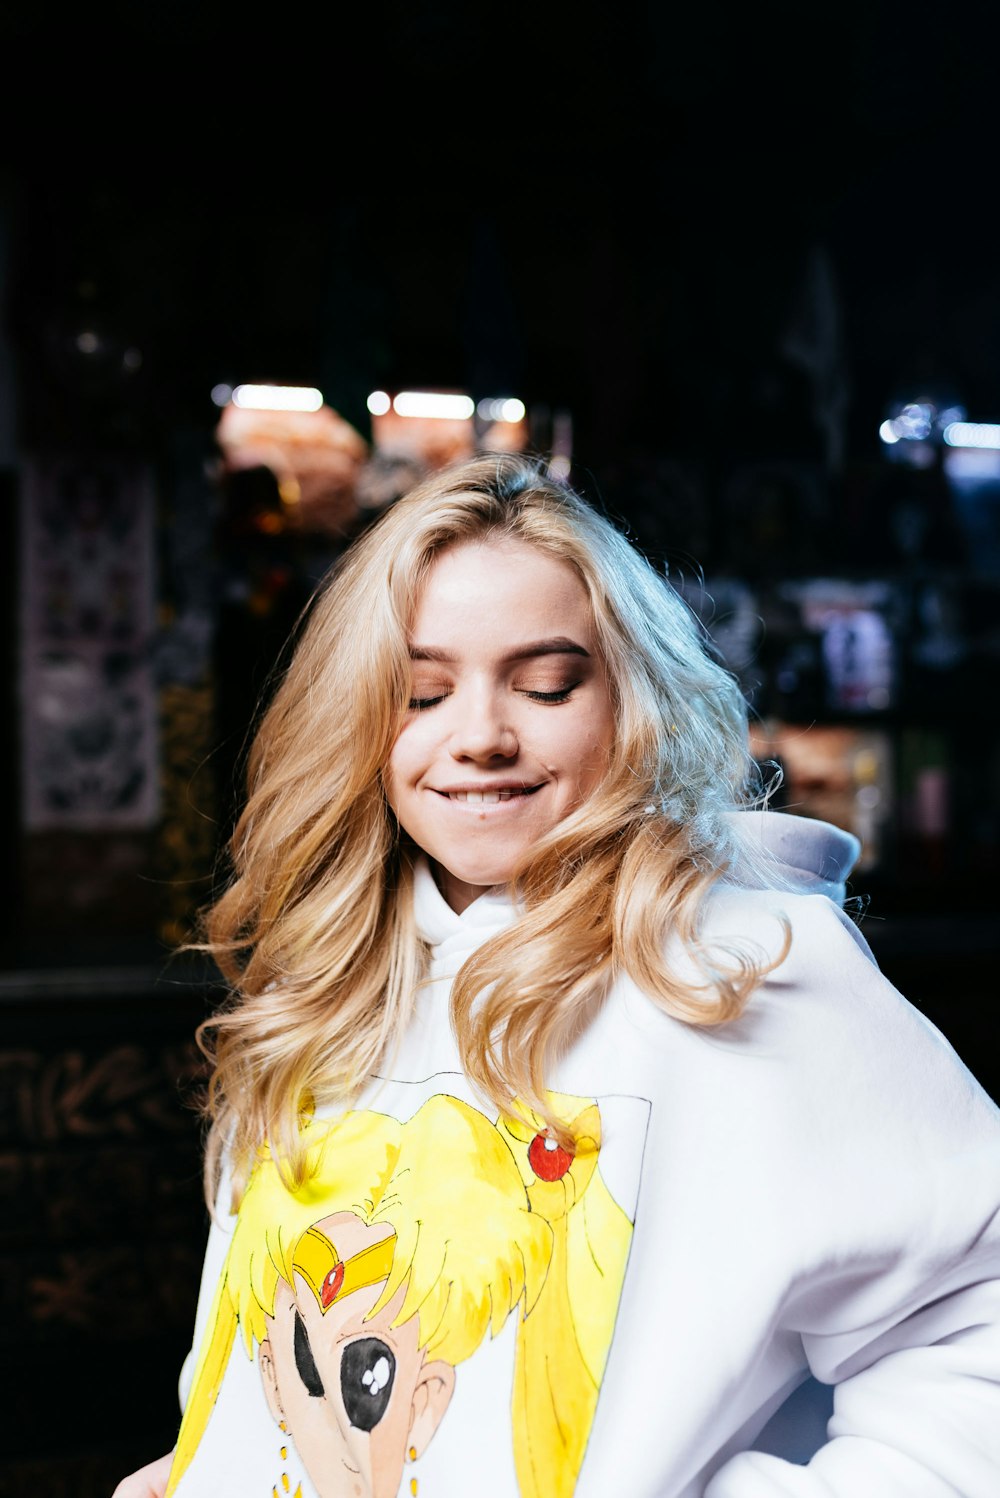 girl in yellow and white floral shirt smiling